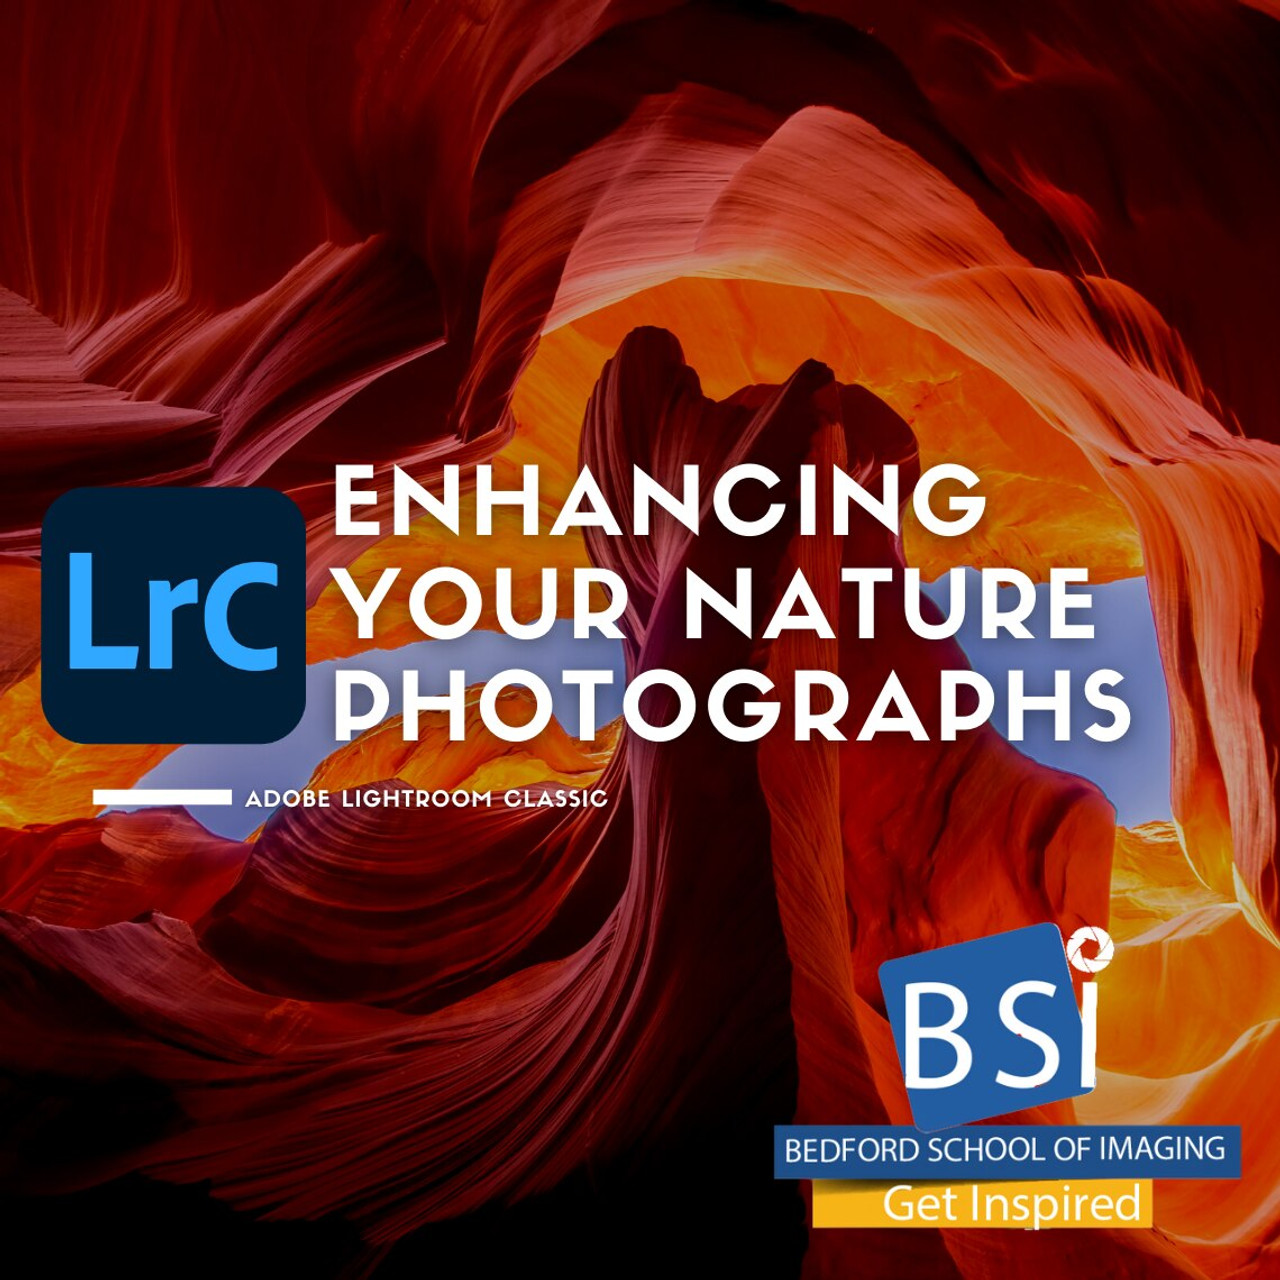 304. Adobe Lightroom Classic - Enhancing Your Nature Photographs - Fort Smith